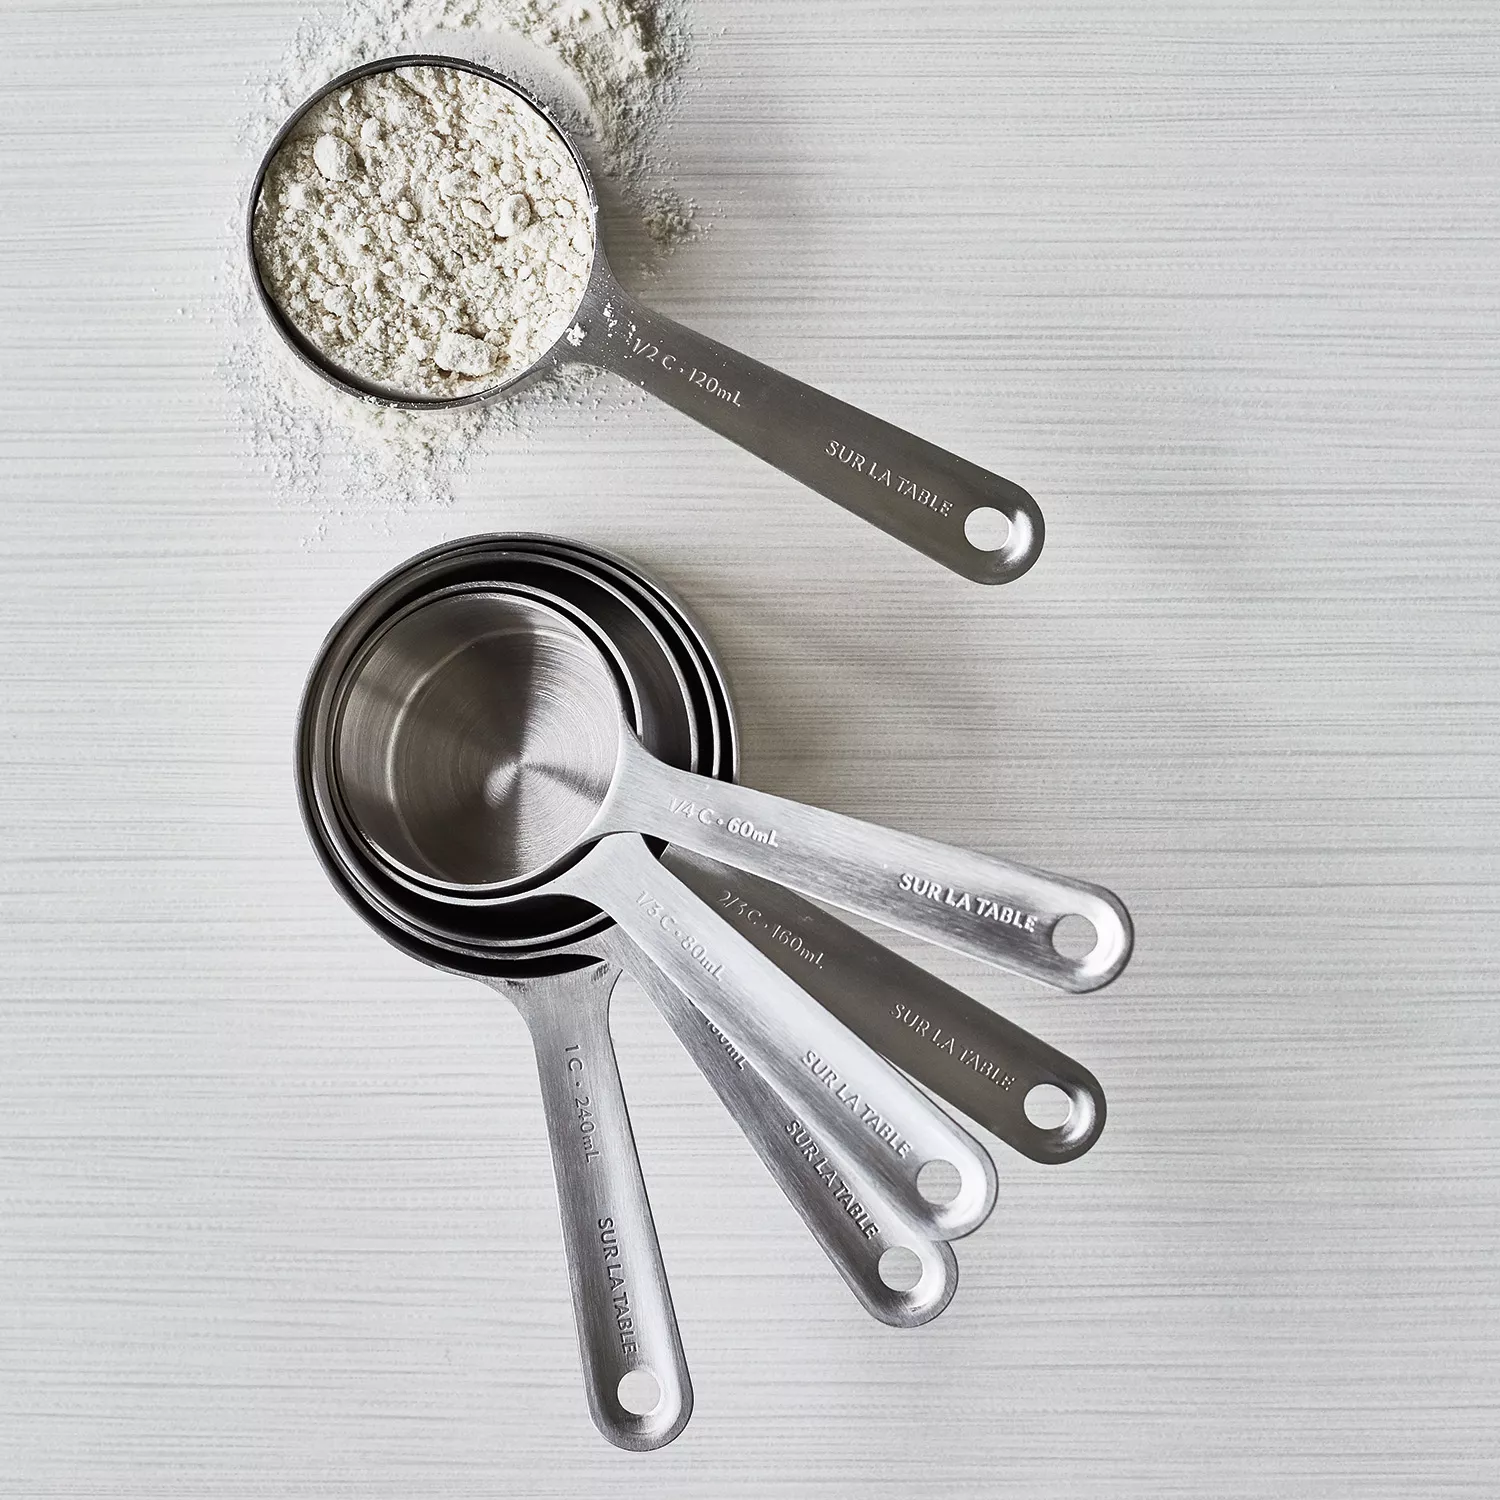 Sur La Table Stainless Steel Measuring Cups & Spoons, Set of 8, Silver